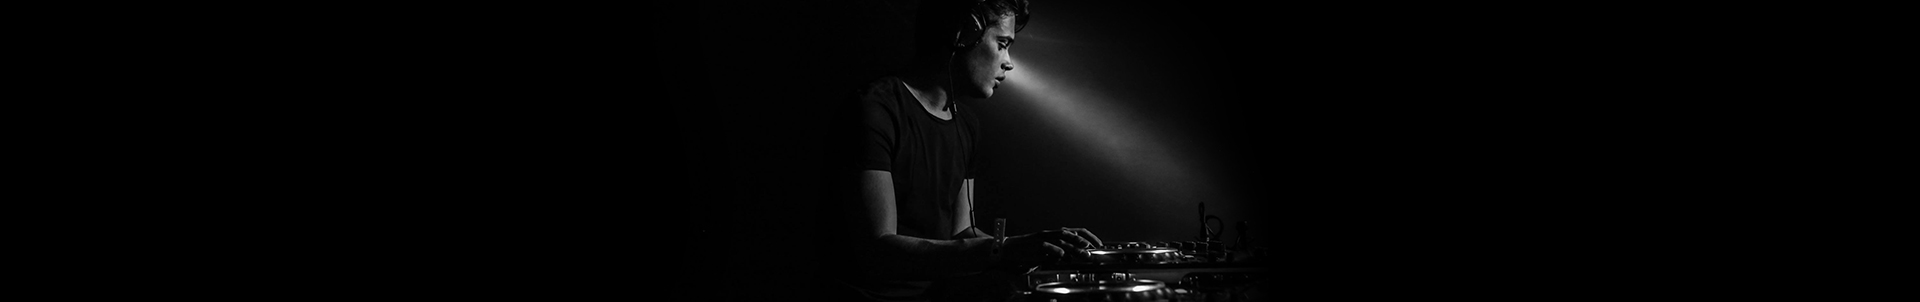 Check out the guest mix from Dastic on SLAM!